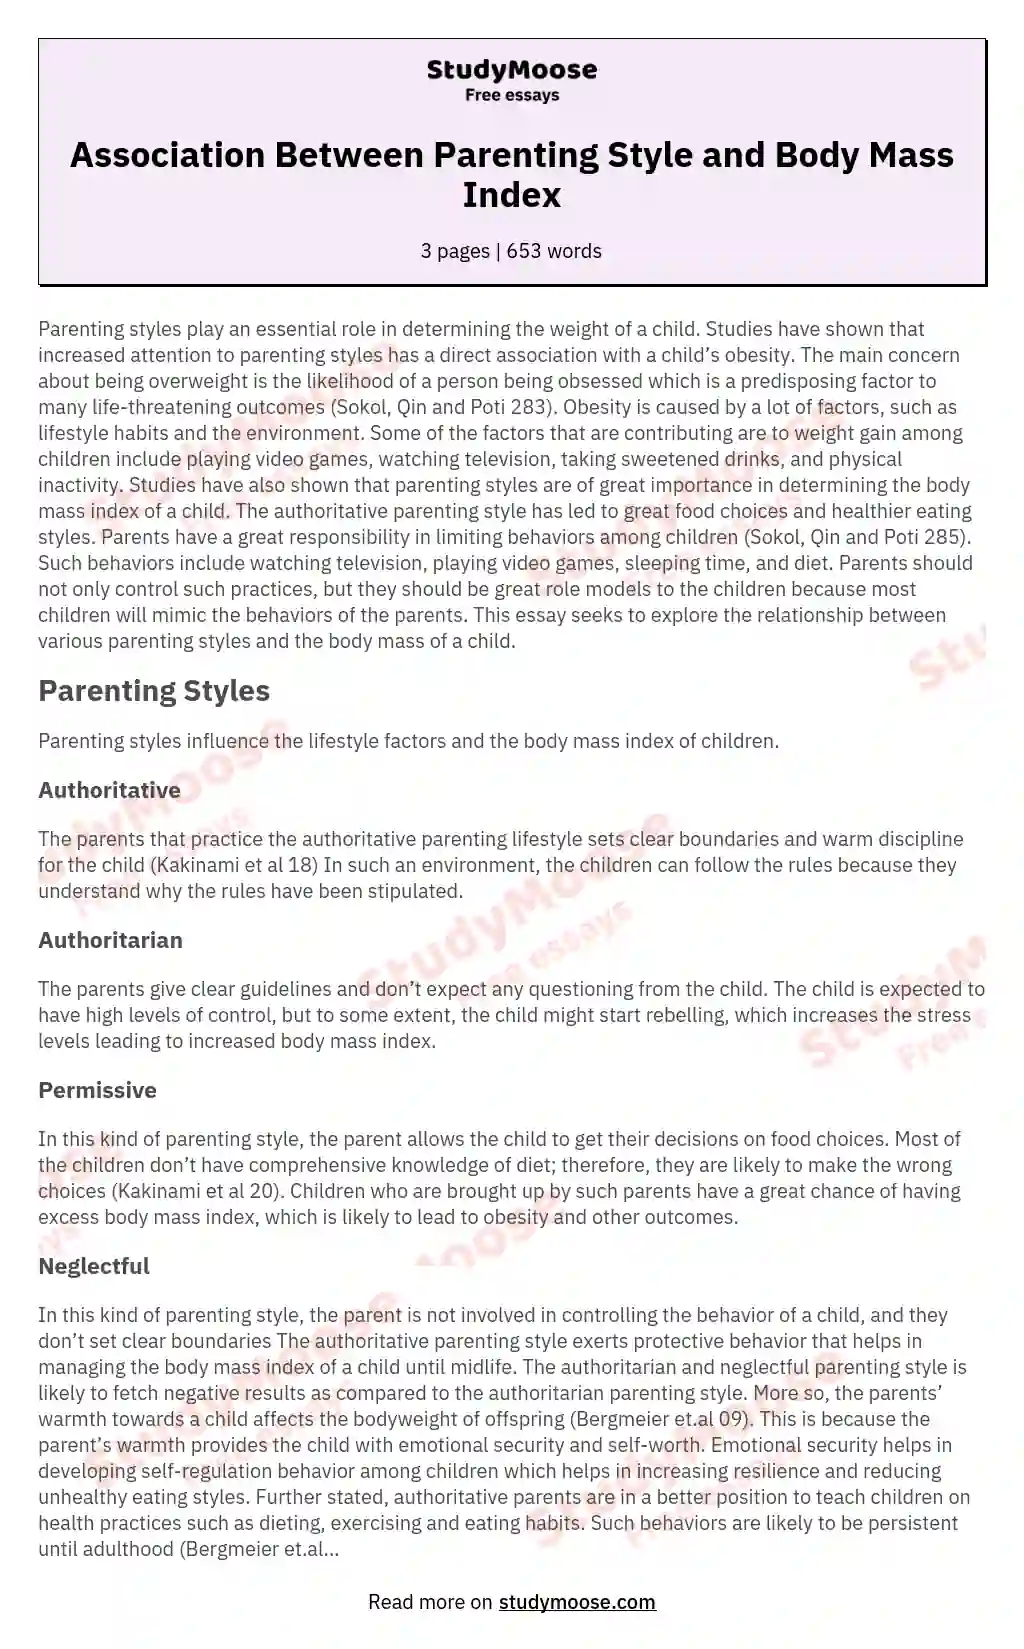 Association Between Parenting Style and Body Mass Index essay